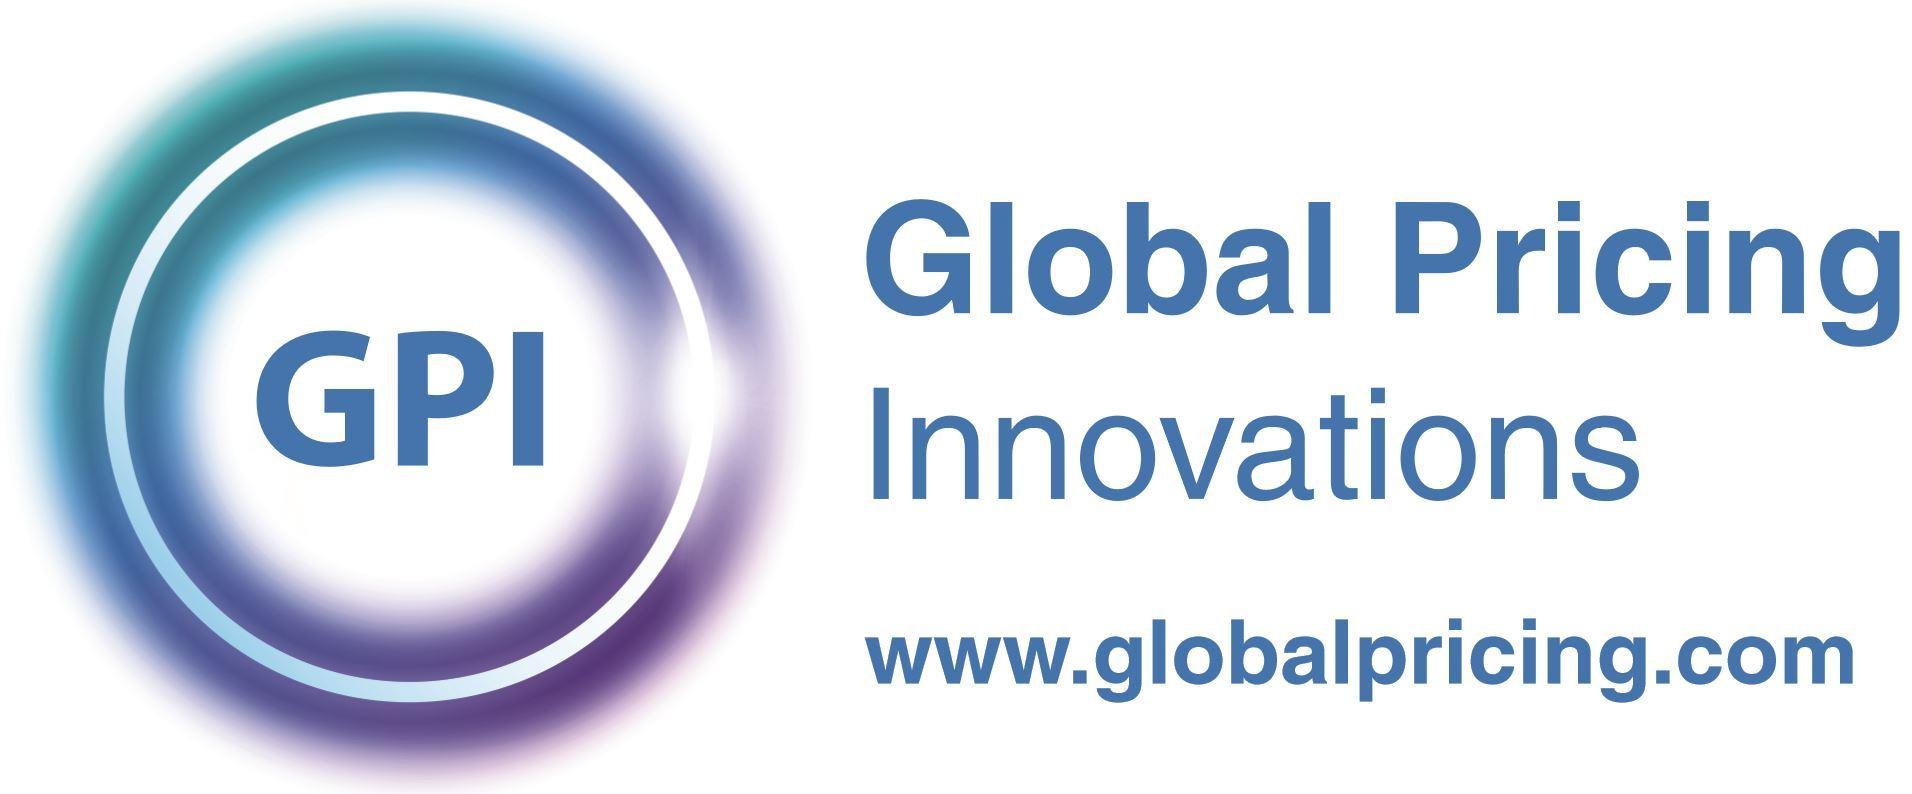 Global Pricing Innovations